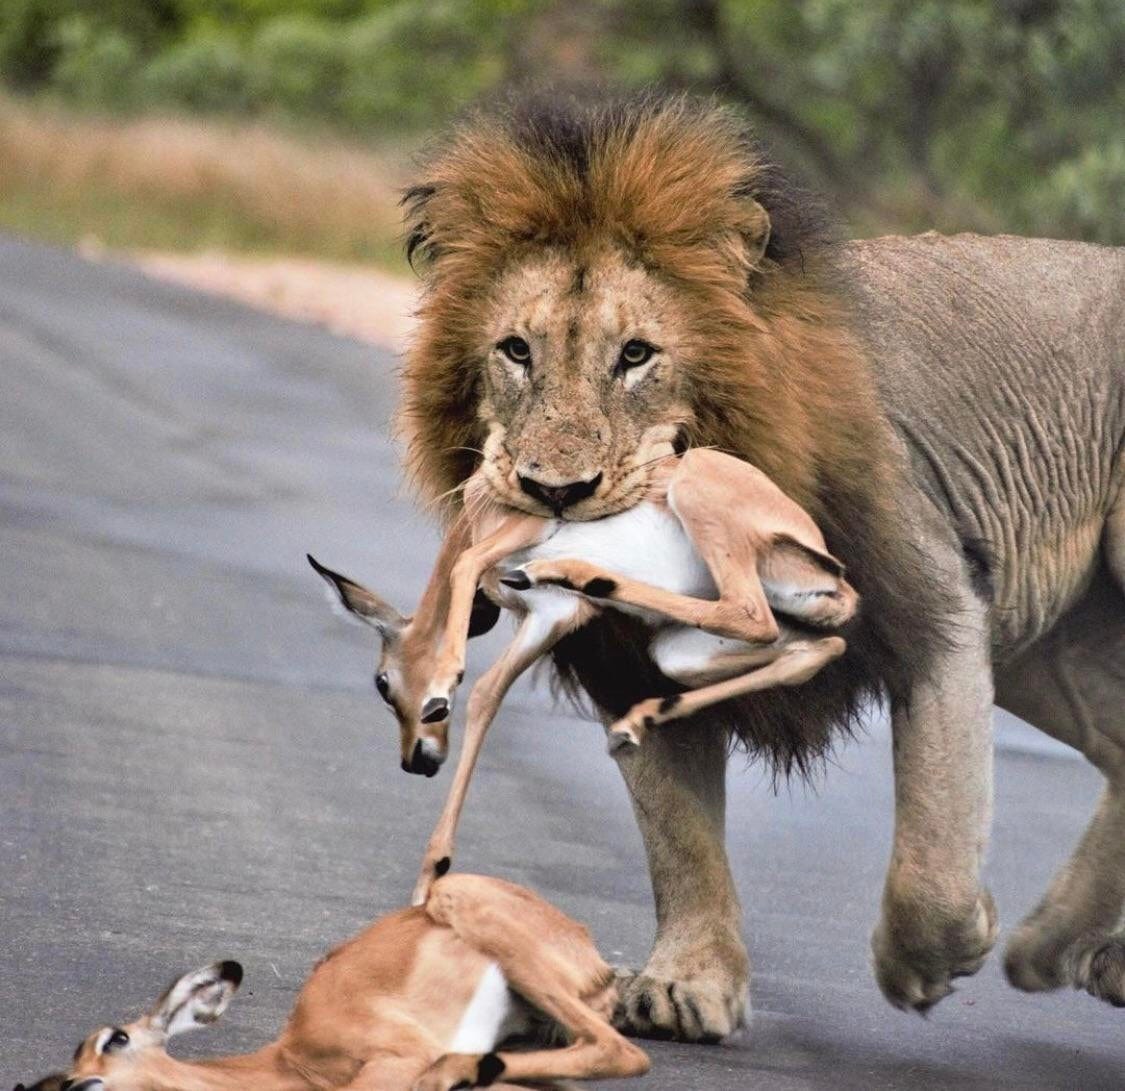 This lion carrying his meal : r/natureismetal